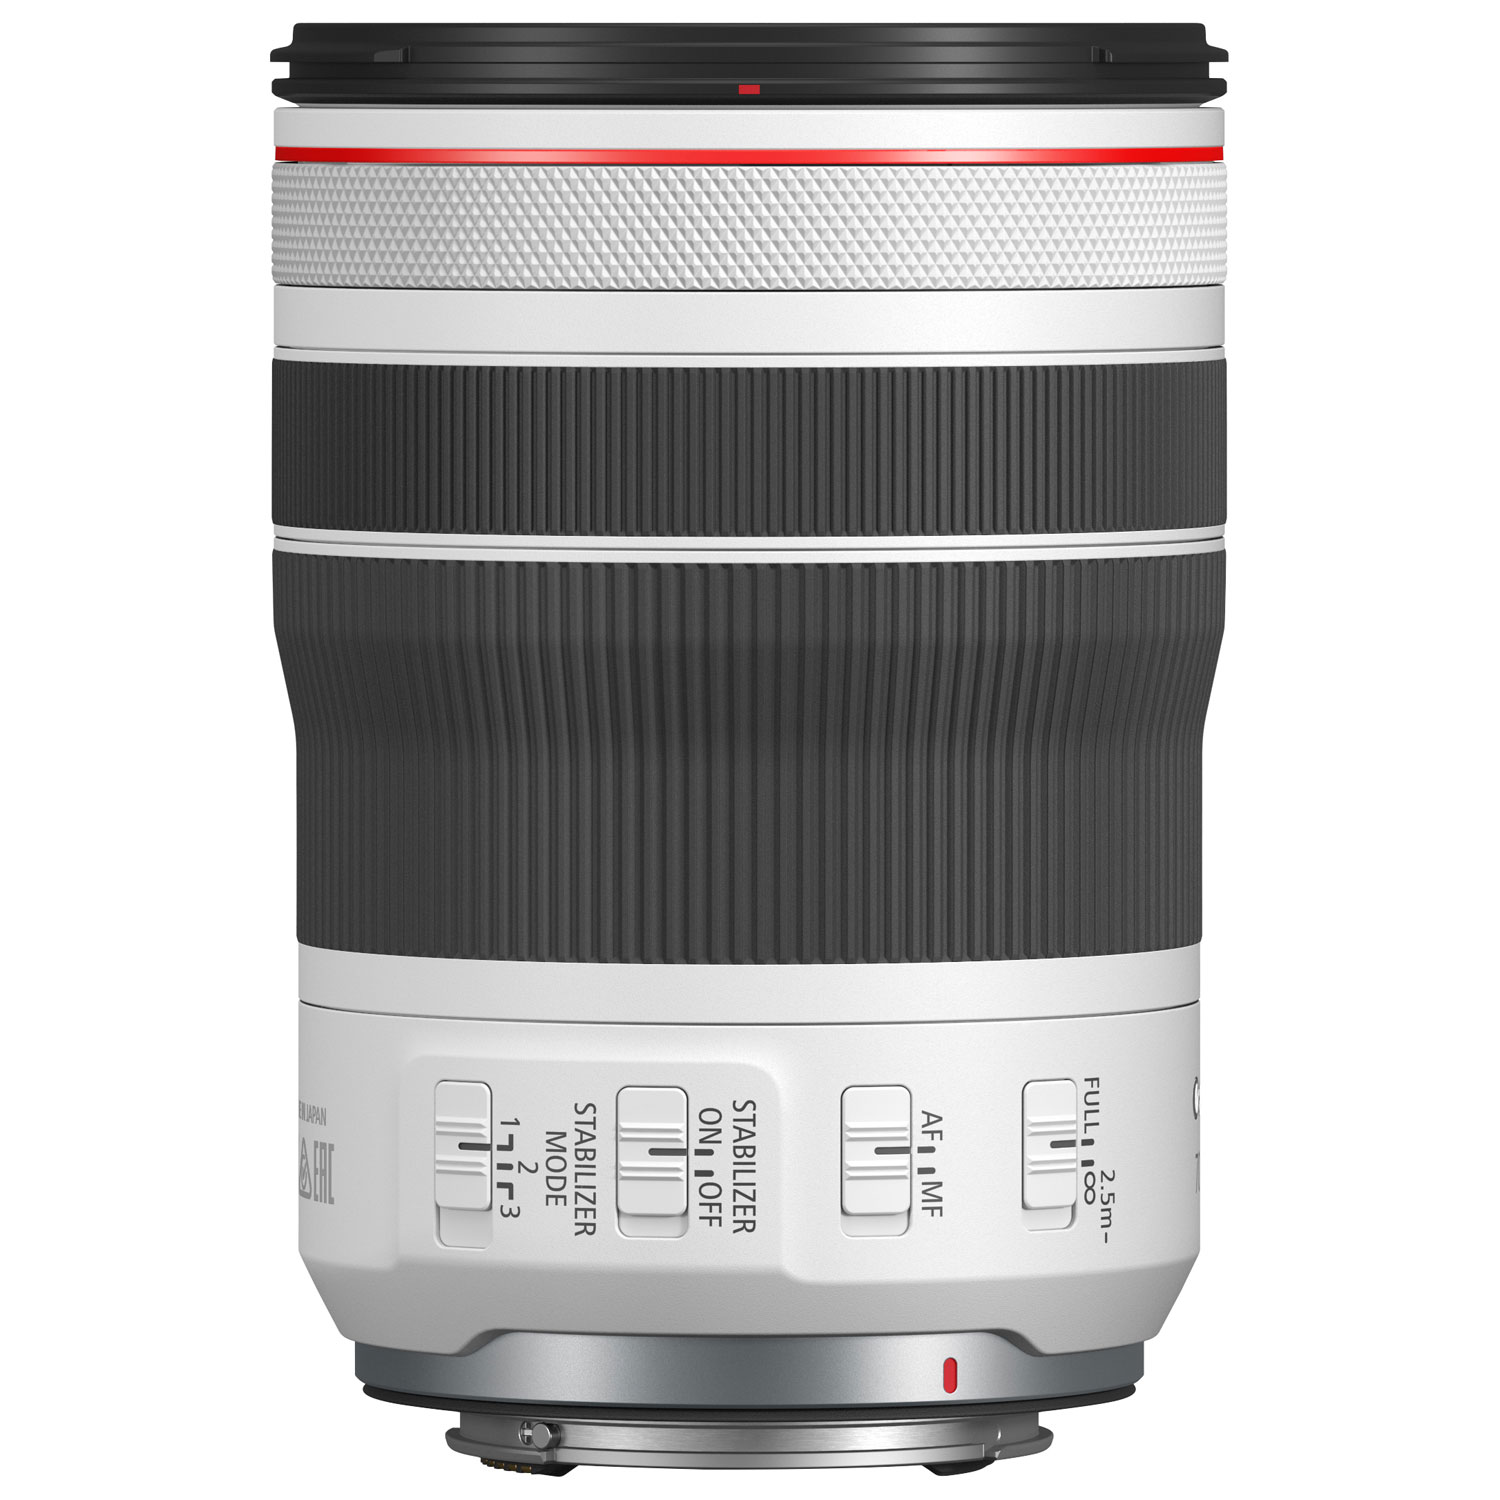 Canon RF 70-200mm f/4 L IS USM Lens - White | Best Buy Canada